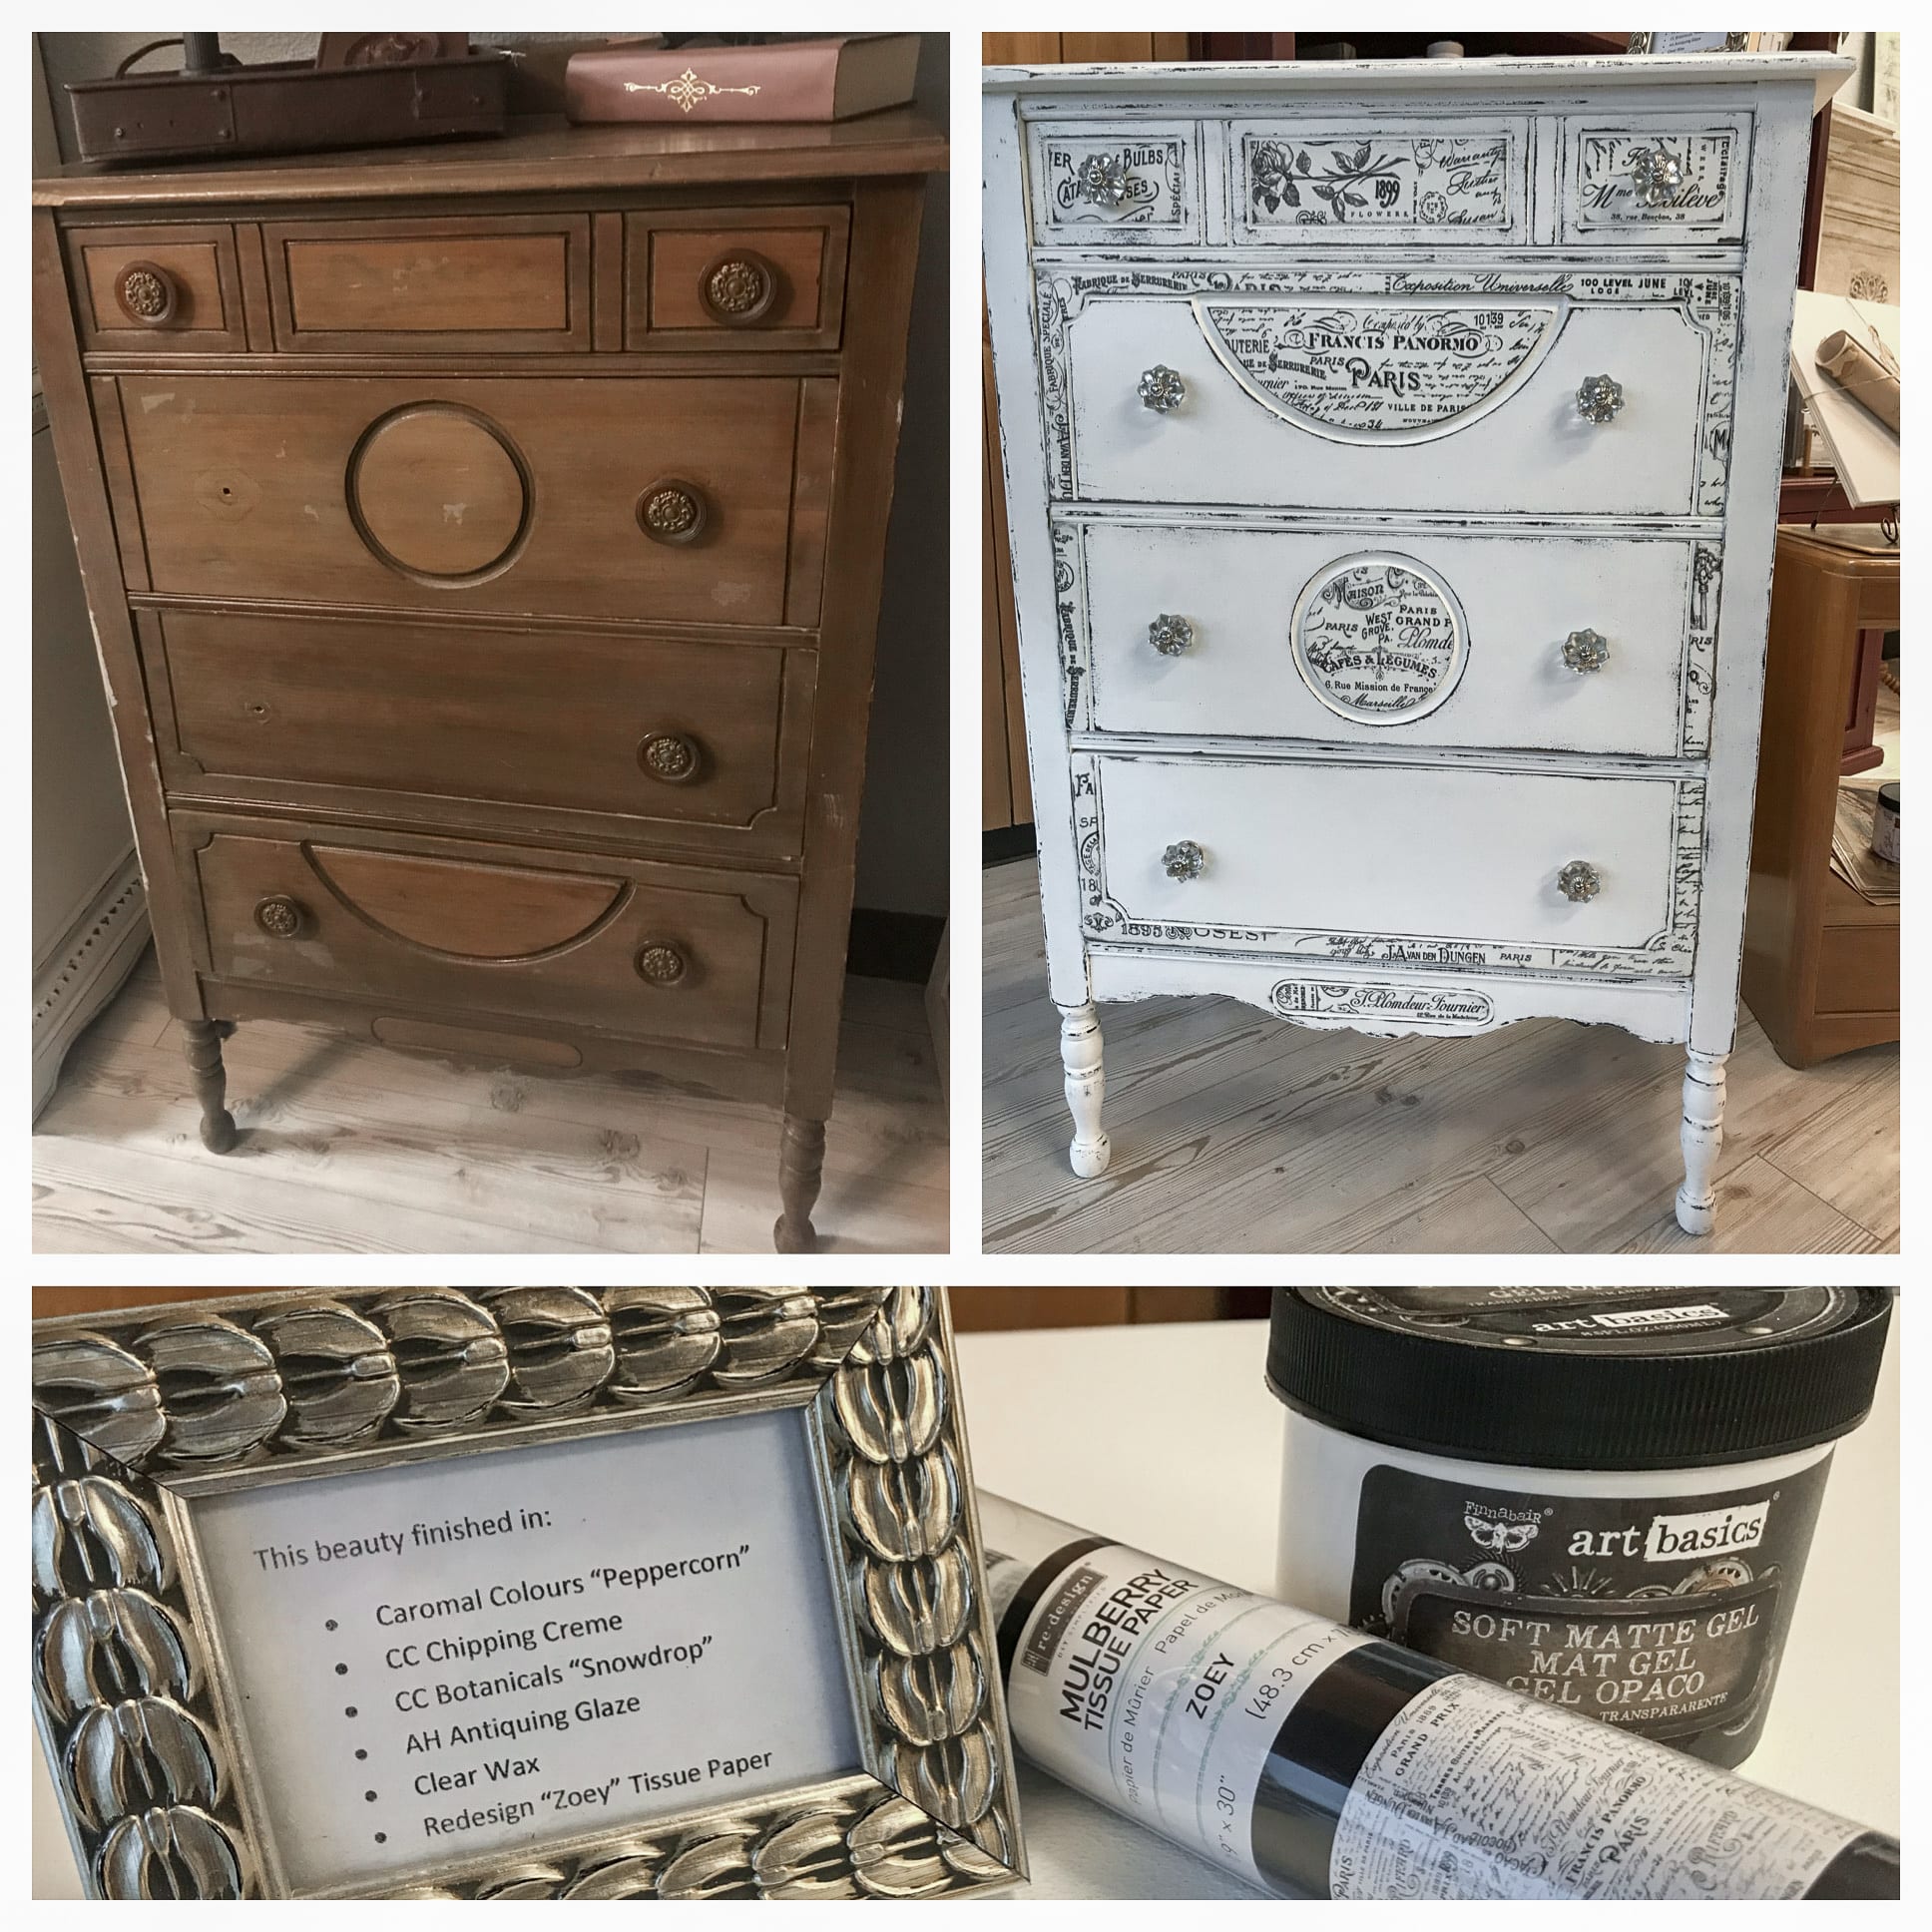 Painted / decoupaged vintage chest of drawers